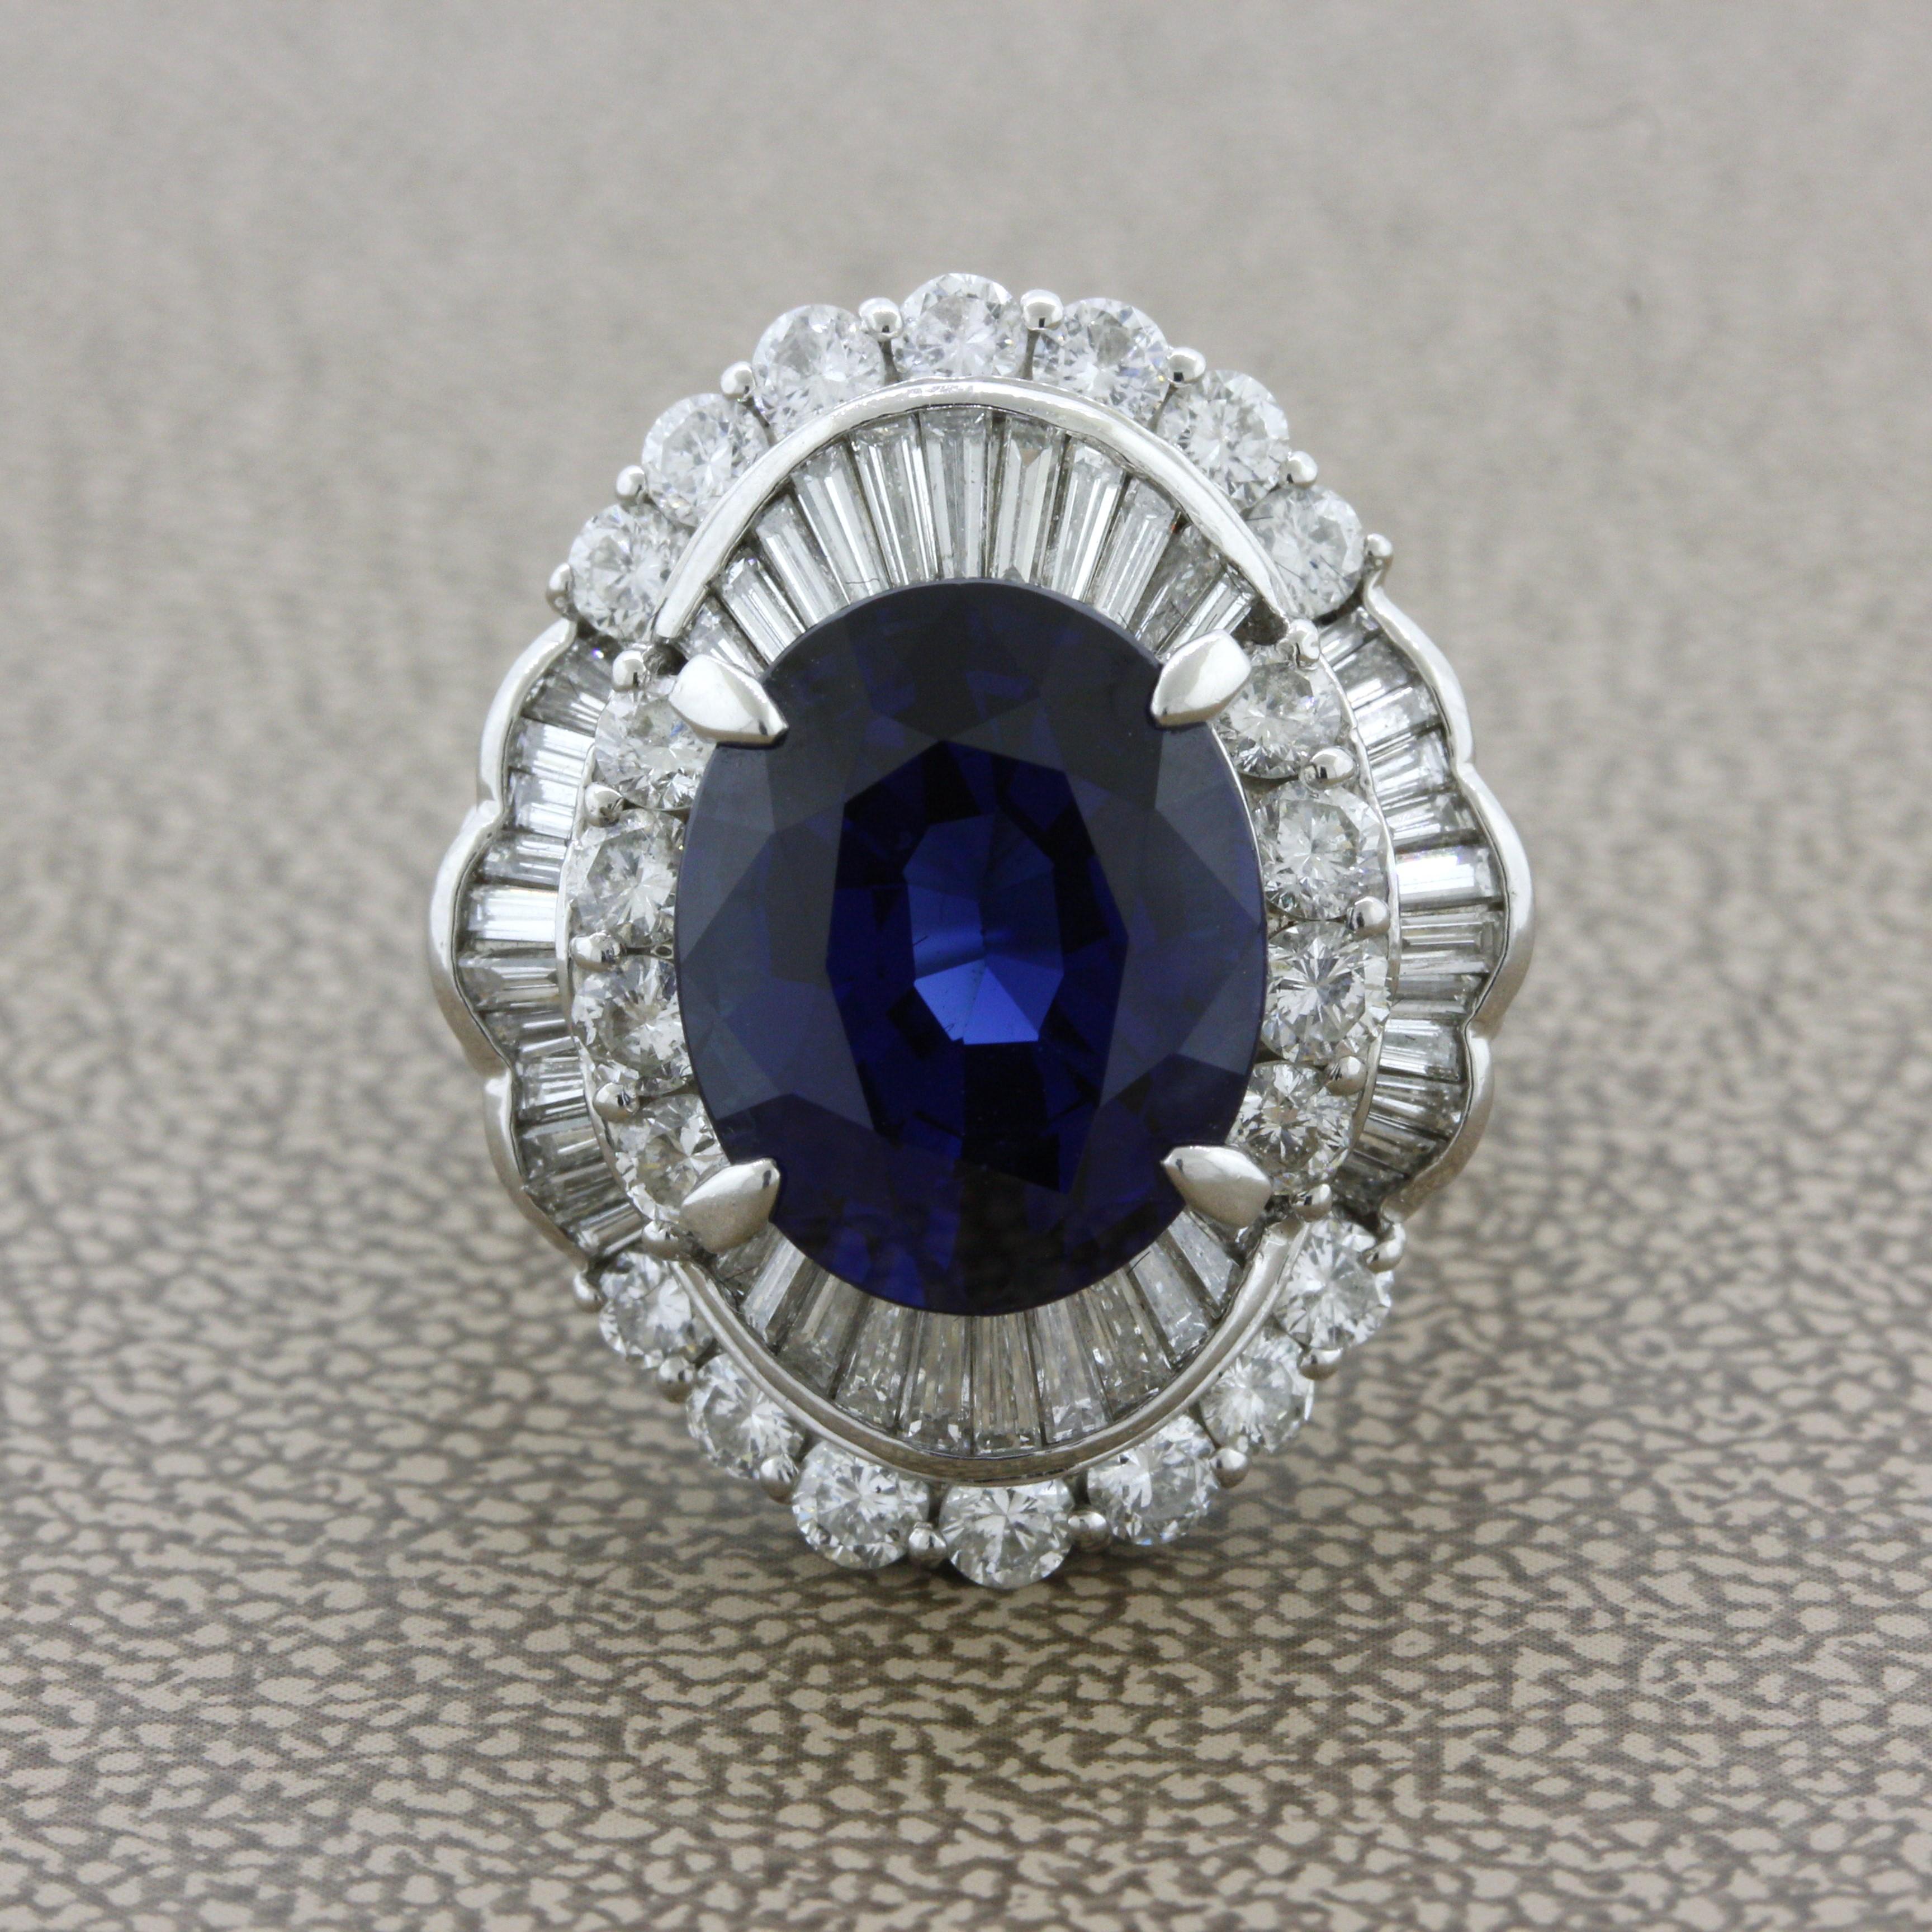 A rich velvety sapphire takes center stage. It weighs an impressive 7.19 carats and has a brilliant deep blue color which is even and clean. Adding to that, the stone is certified by the GIA and shows no signs of heat treatment increasing its rarity